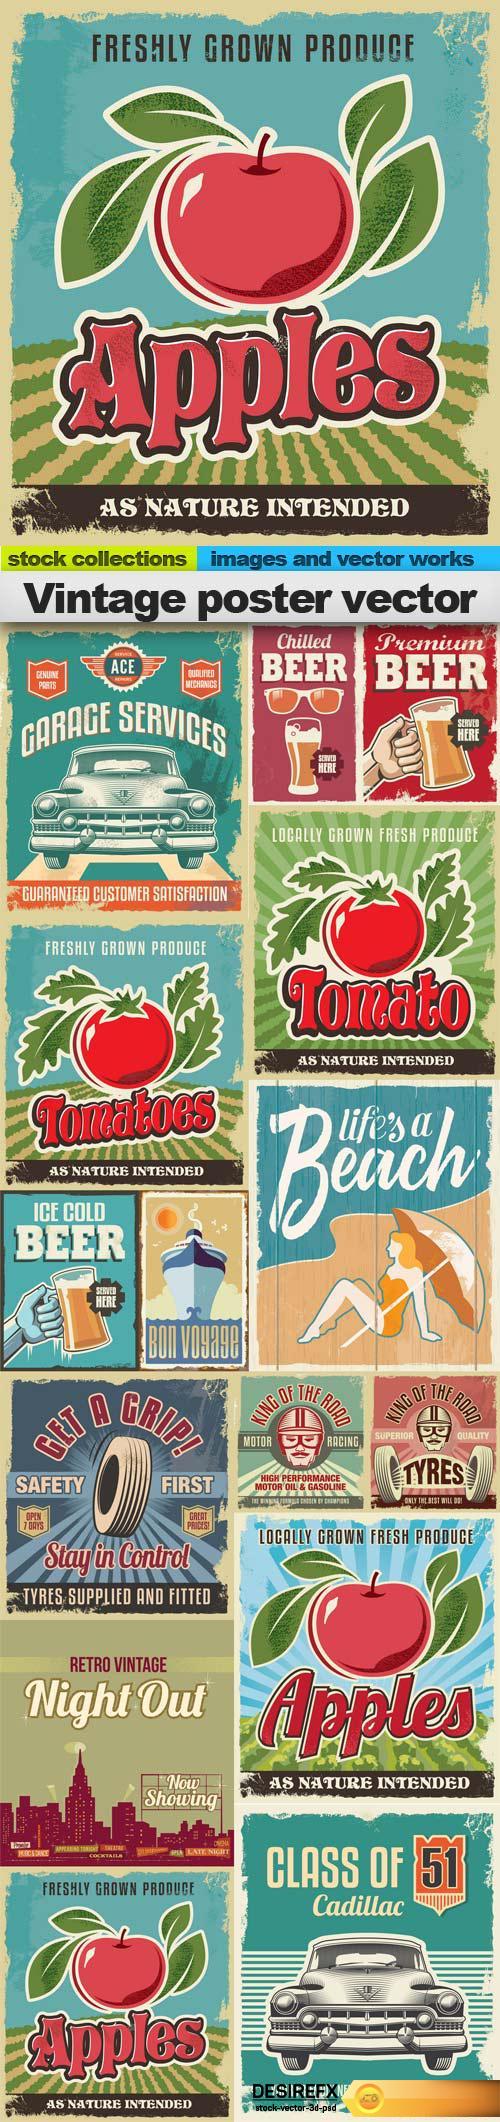 Vintage poster vector, 15 x EPS